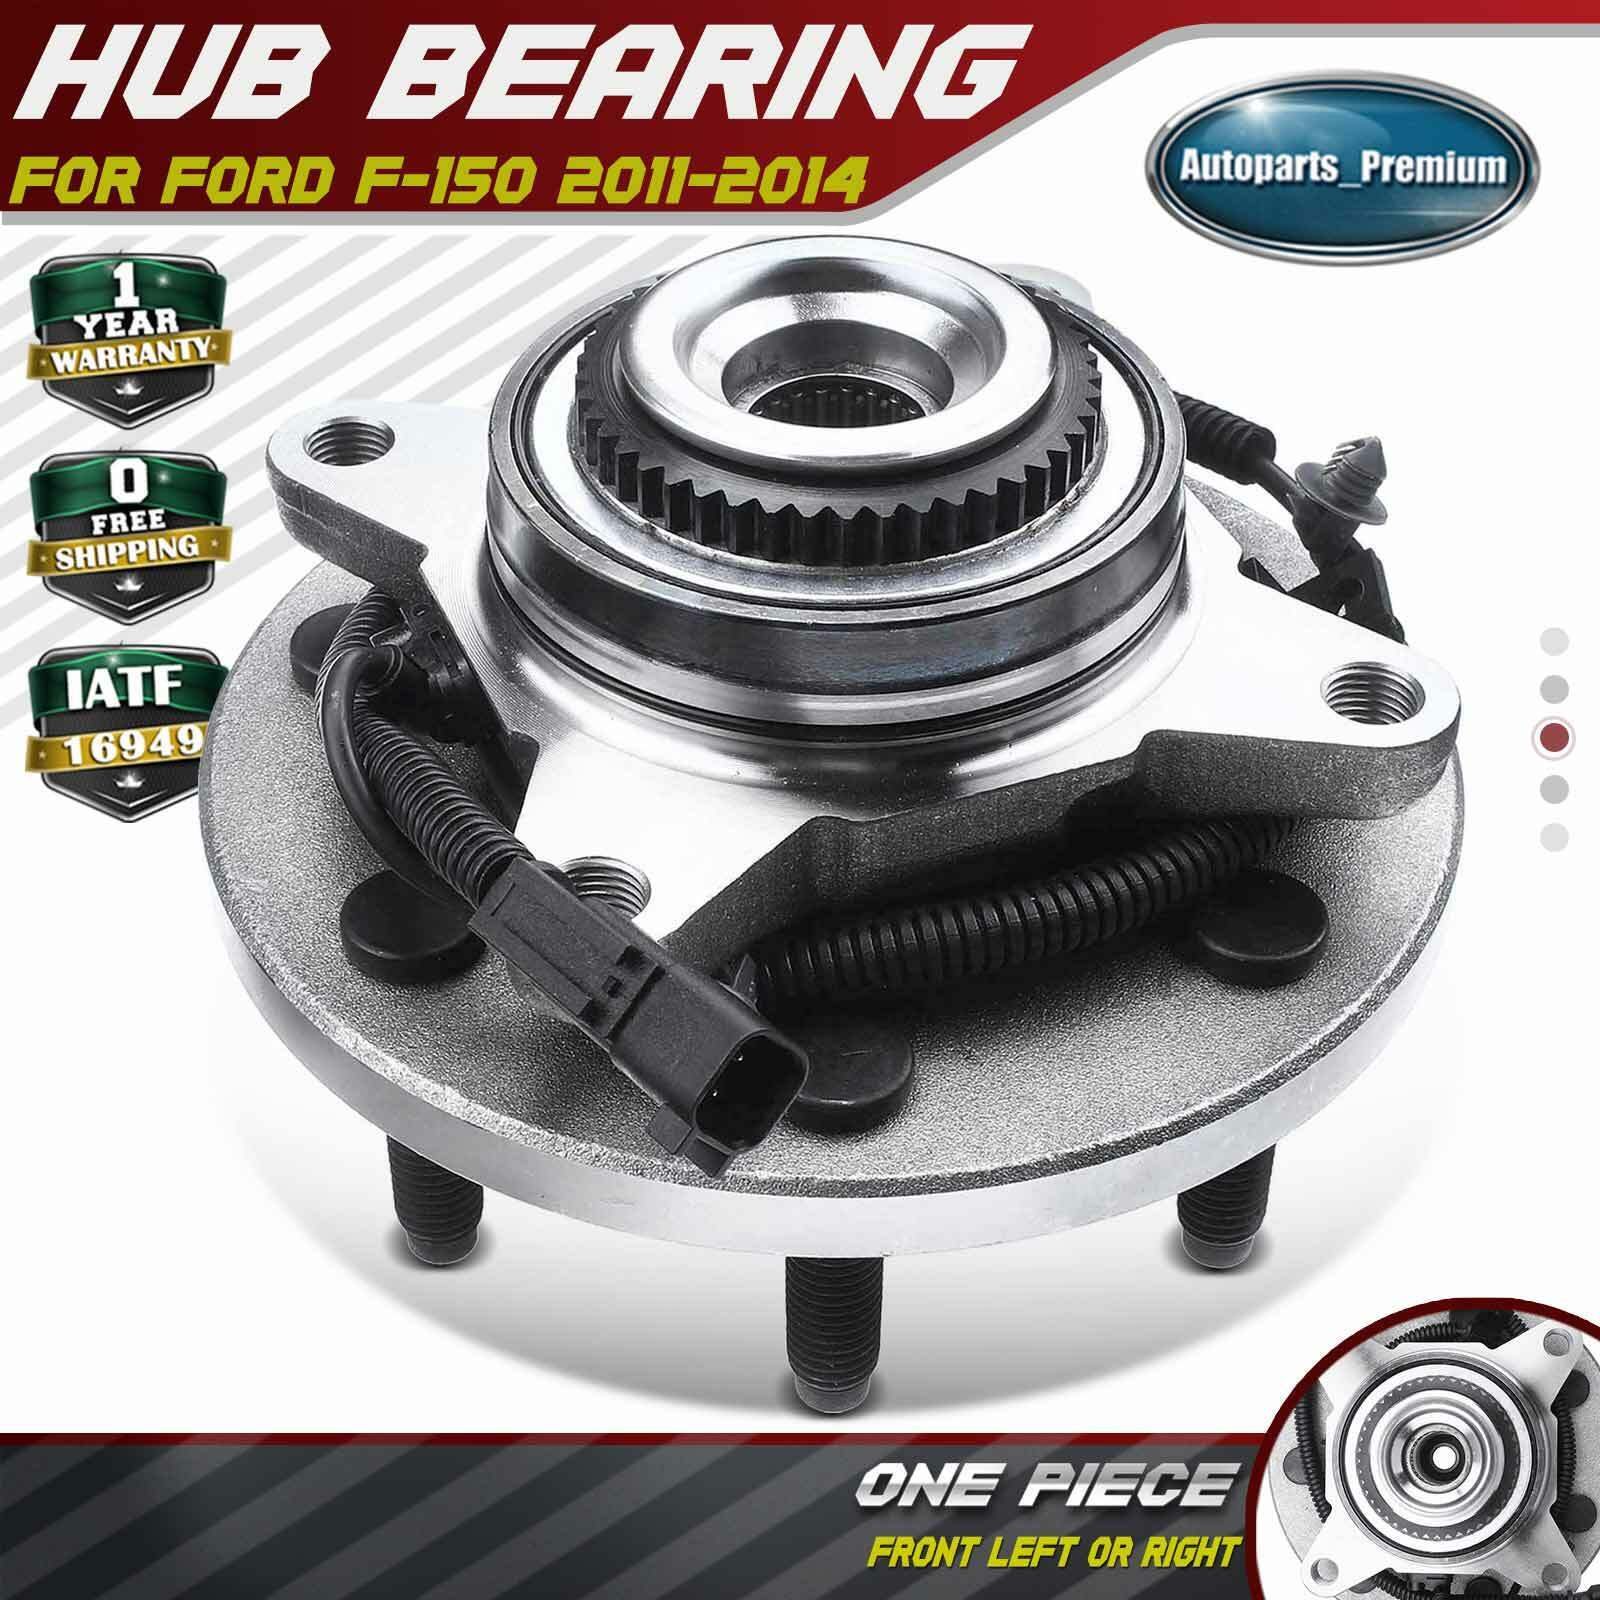 Front Wheel Bearing & Hub Assembly for Ford F-150 2011-2014 with 7 Stud Hub Only